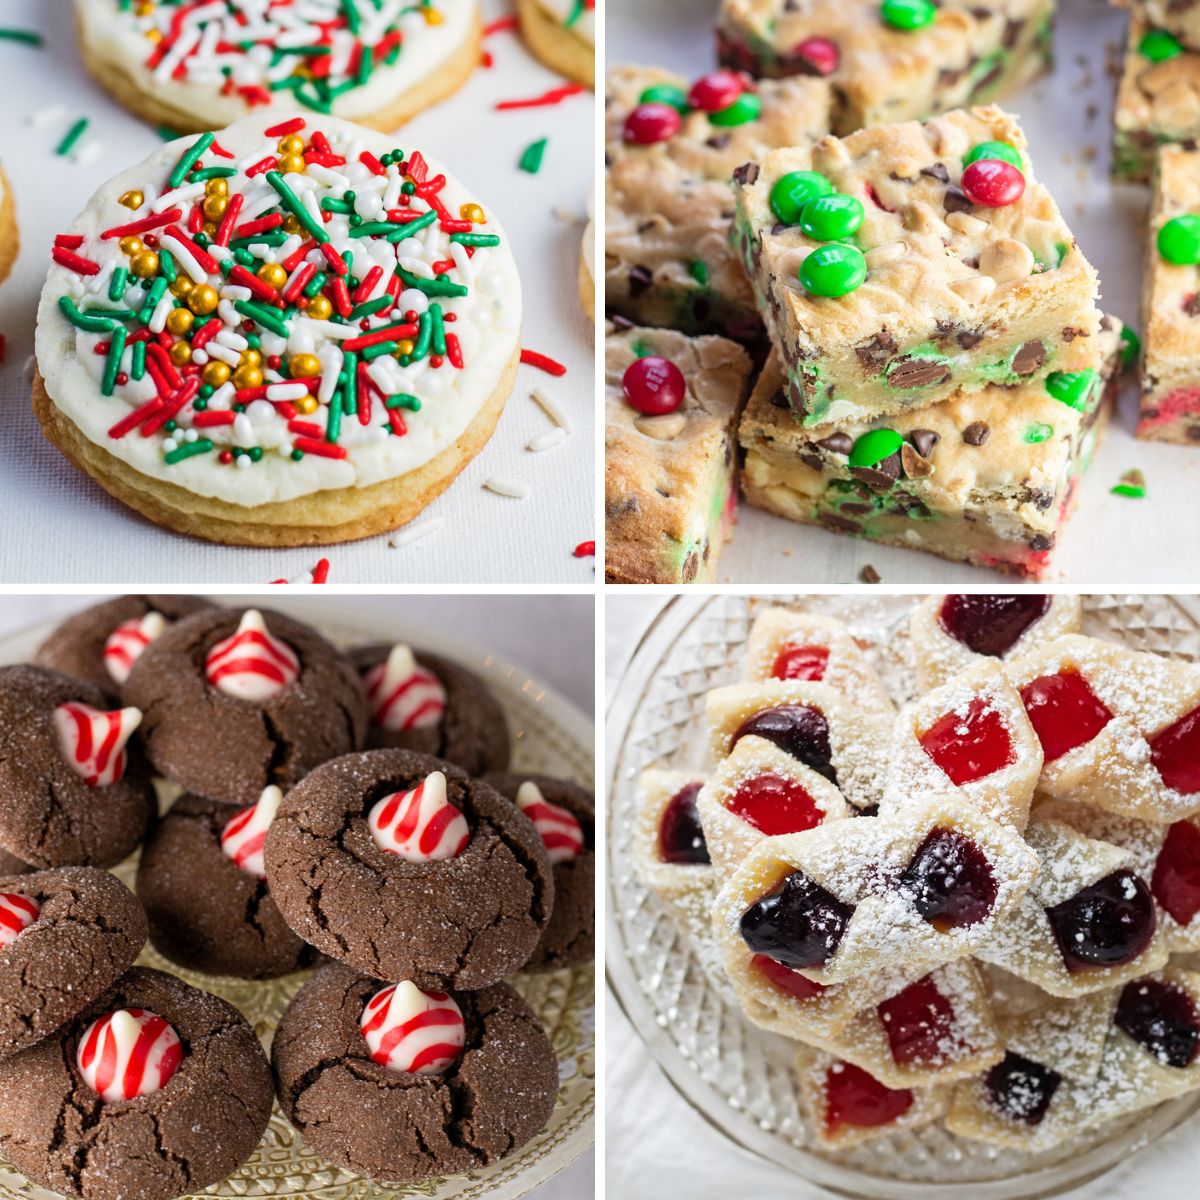 12 days of christmas cookies countdown featuring 4 tasty cookies to bake this year.